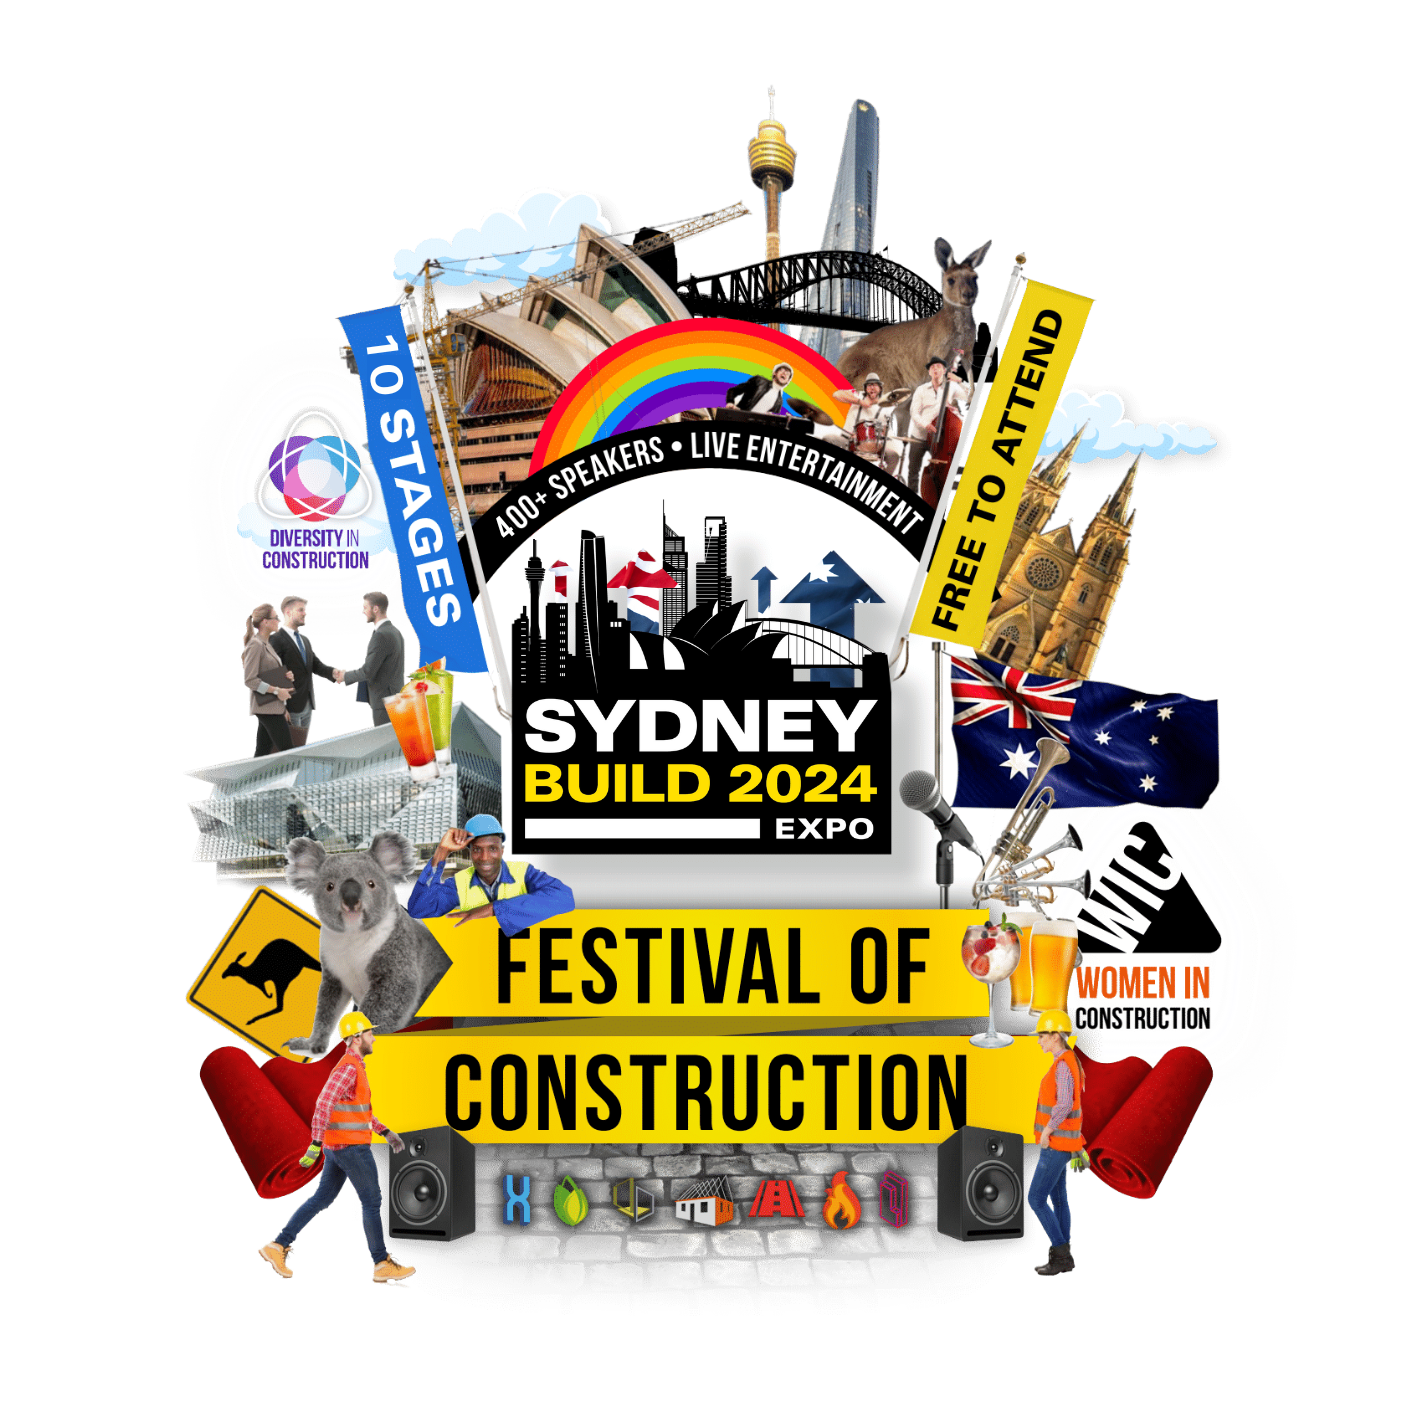 A collection of building industry icons promoting the Sydney Build Expo show